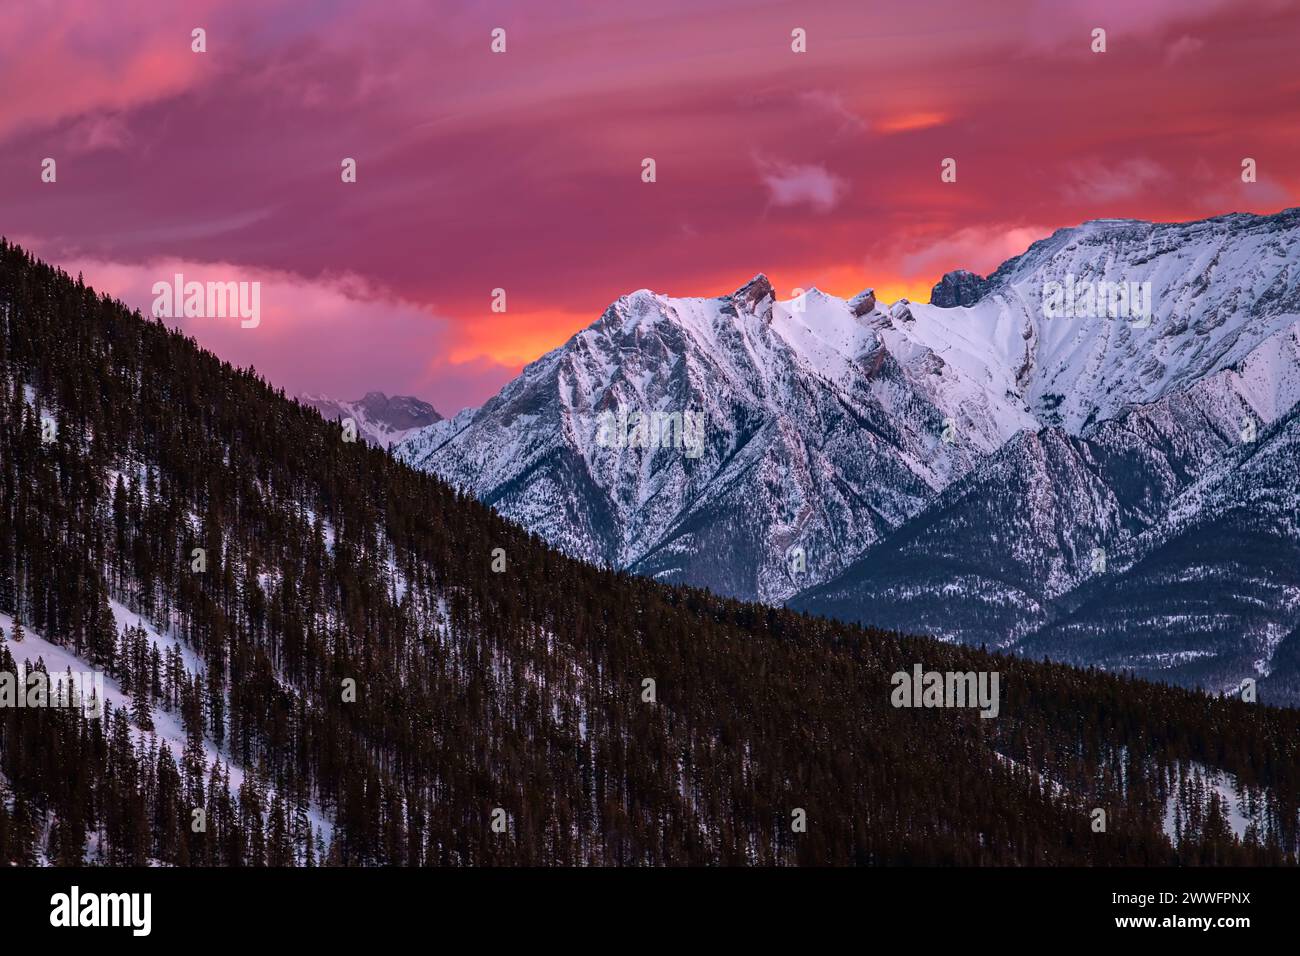 Colourful Sunrise In The Mountains Stock Photo